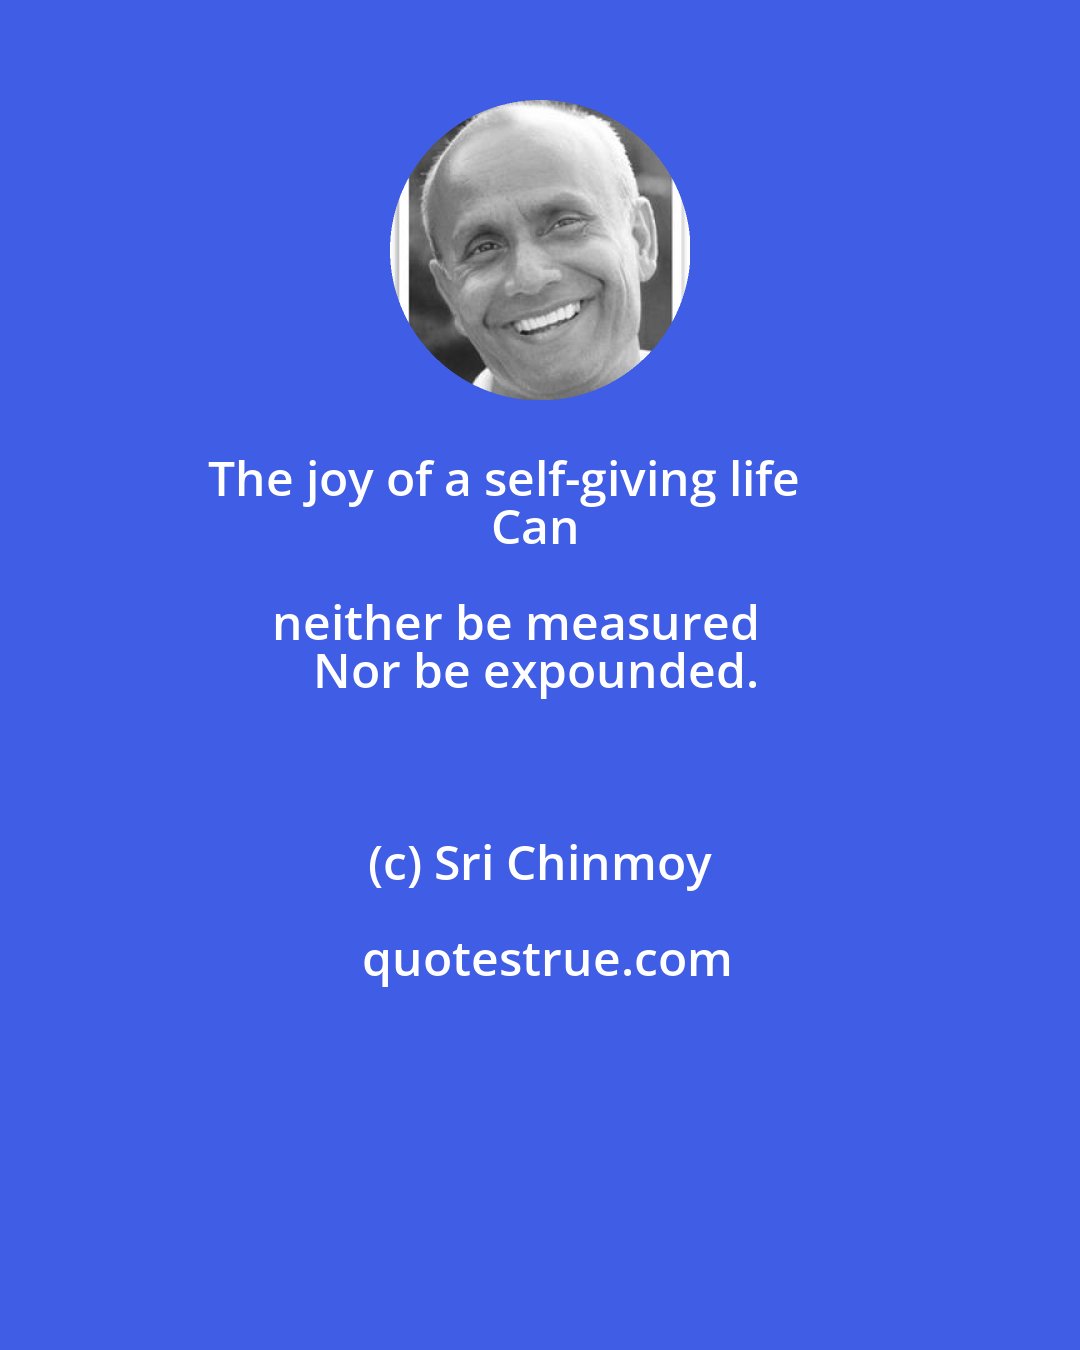 Sri Chinmoy: The joy of a self-giving life       
Can neither be measured     
Nor be expounded.